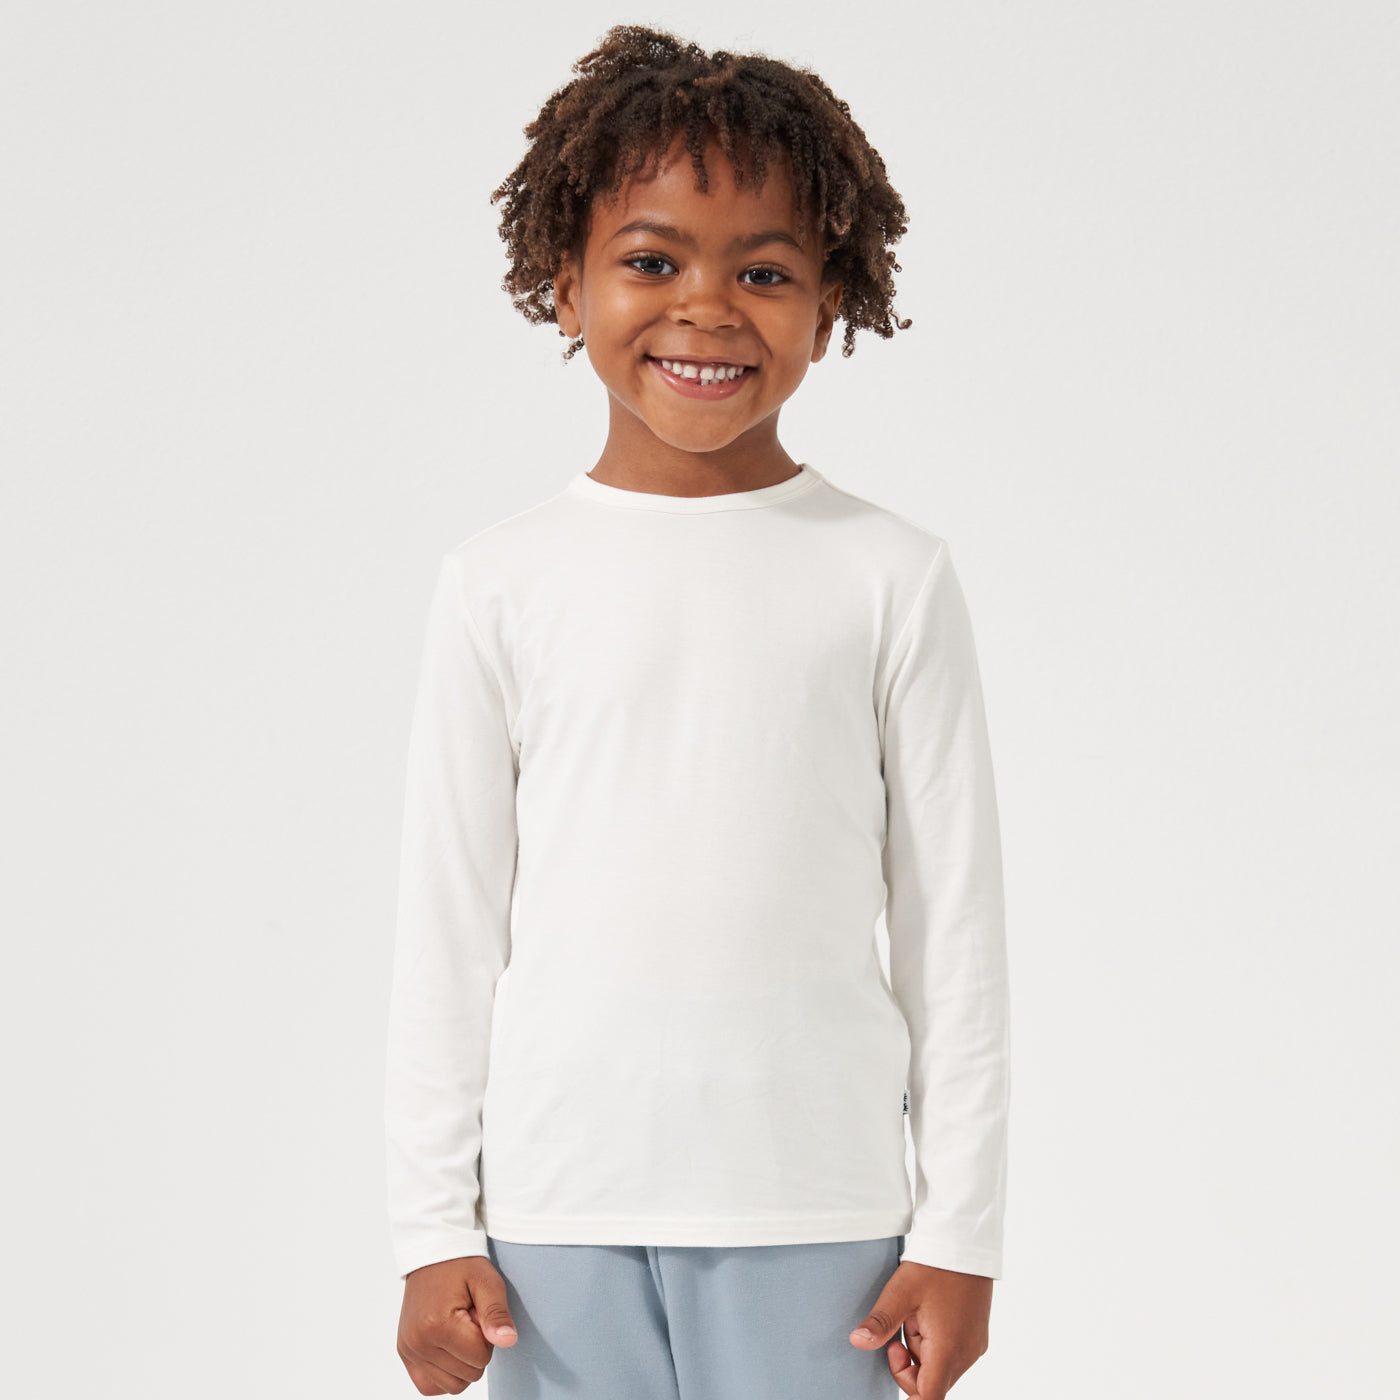 Child wearing an Ivory classic tee paired with Fog joggers